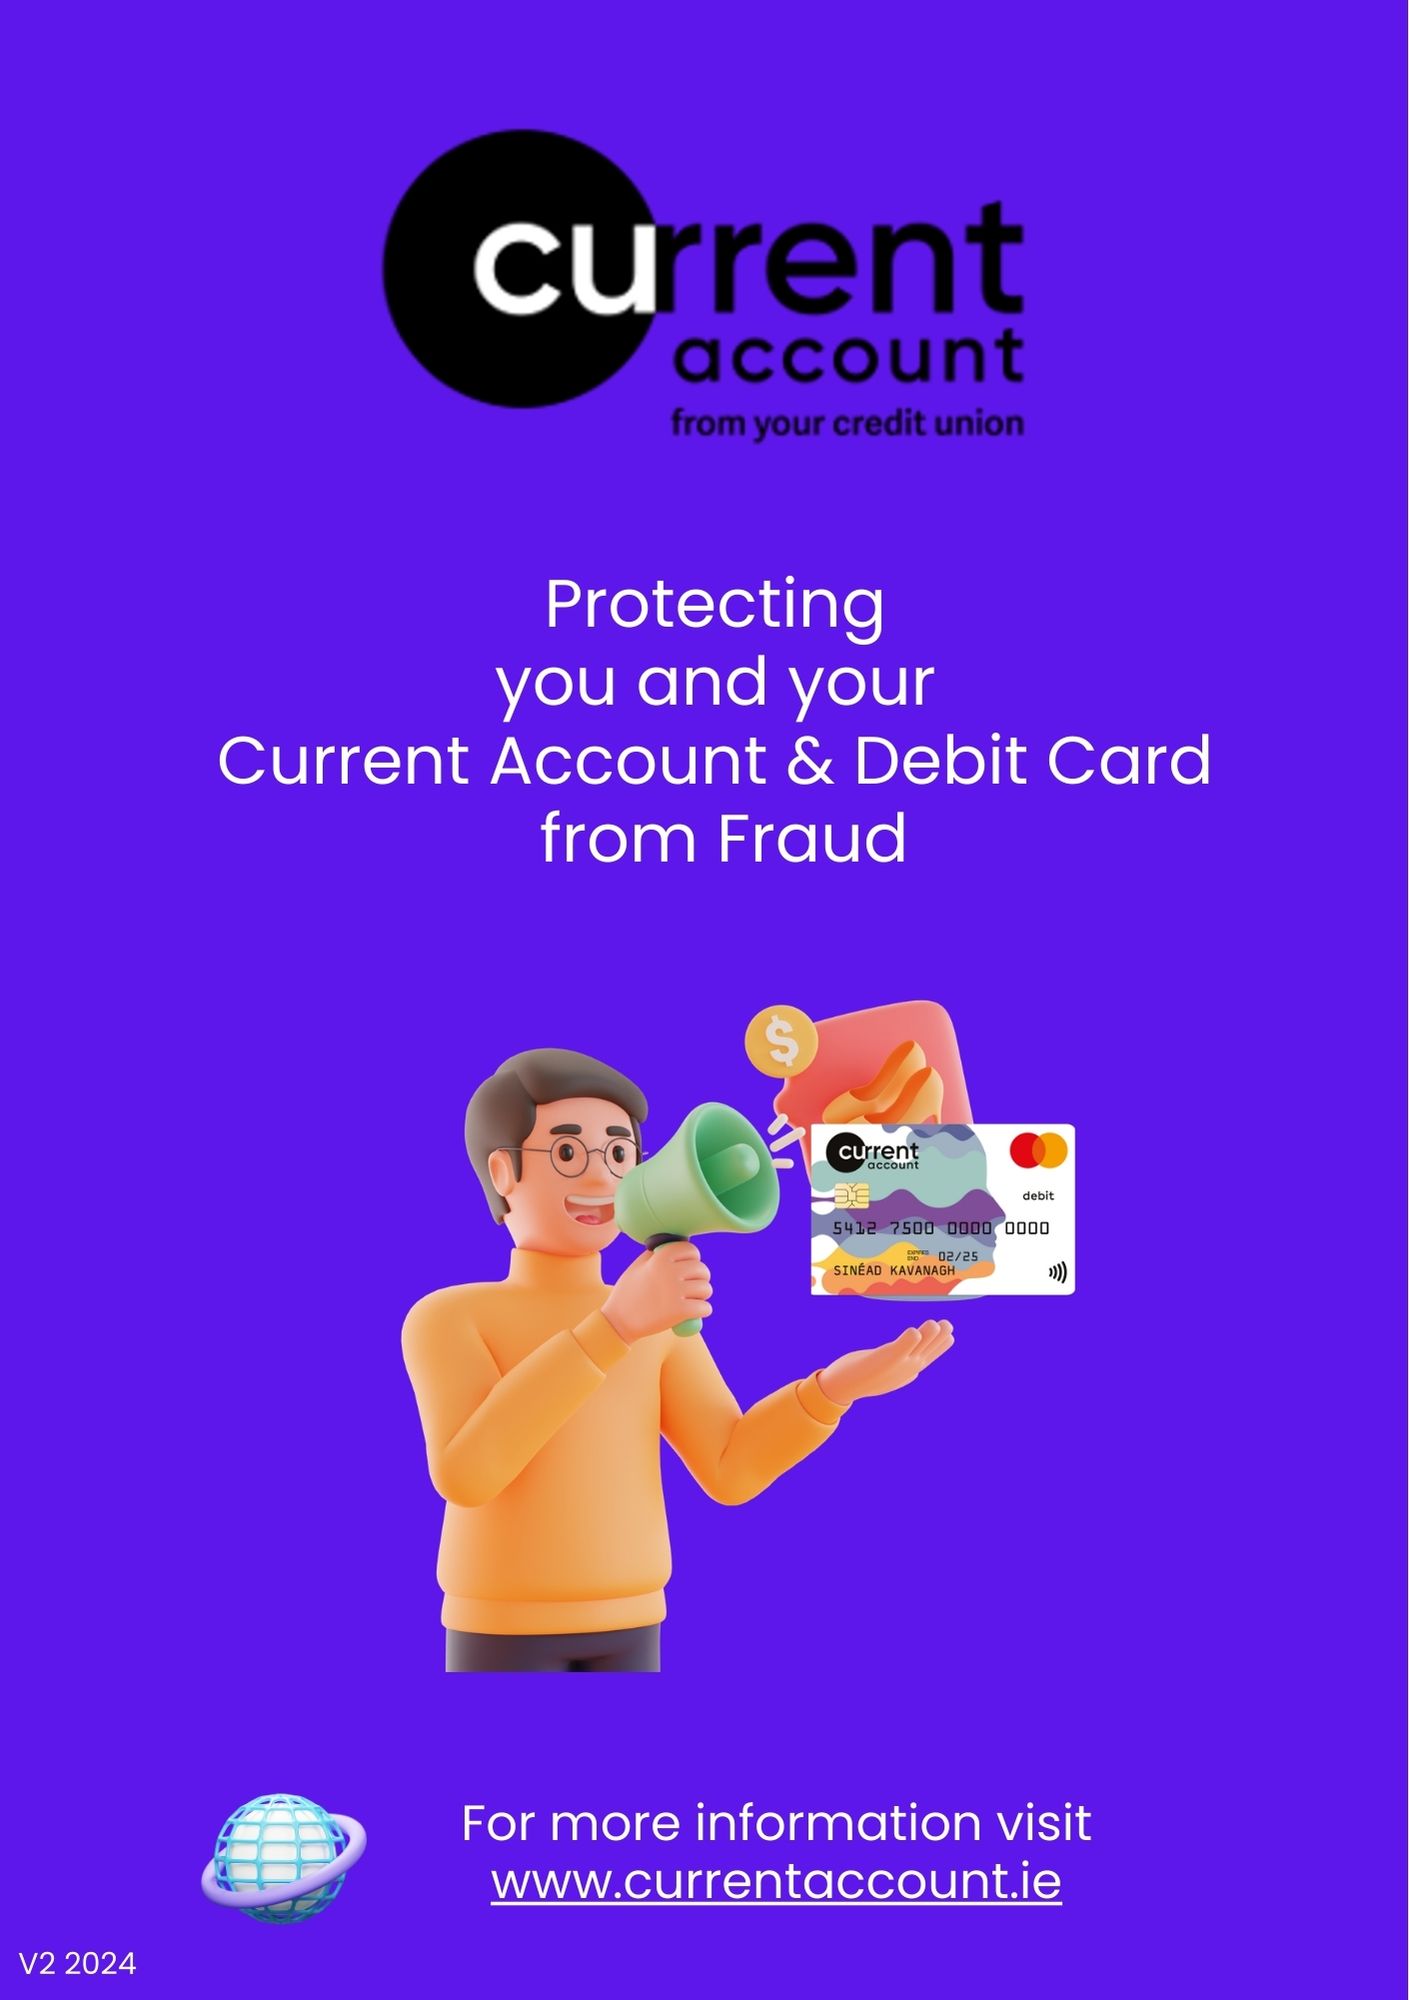 ⚠Protecting you and your Current Account/Debit Card from Fraud ⚠